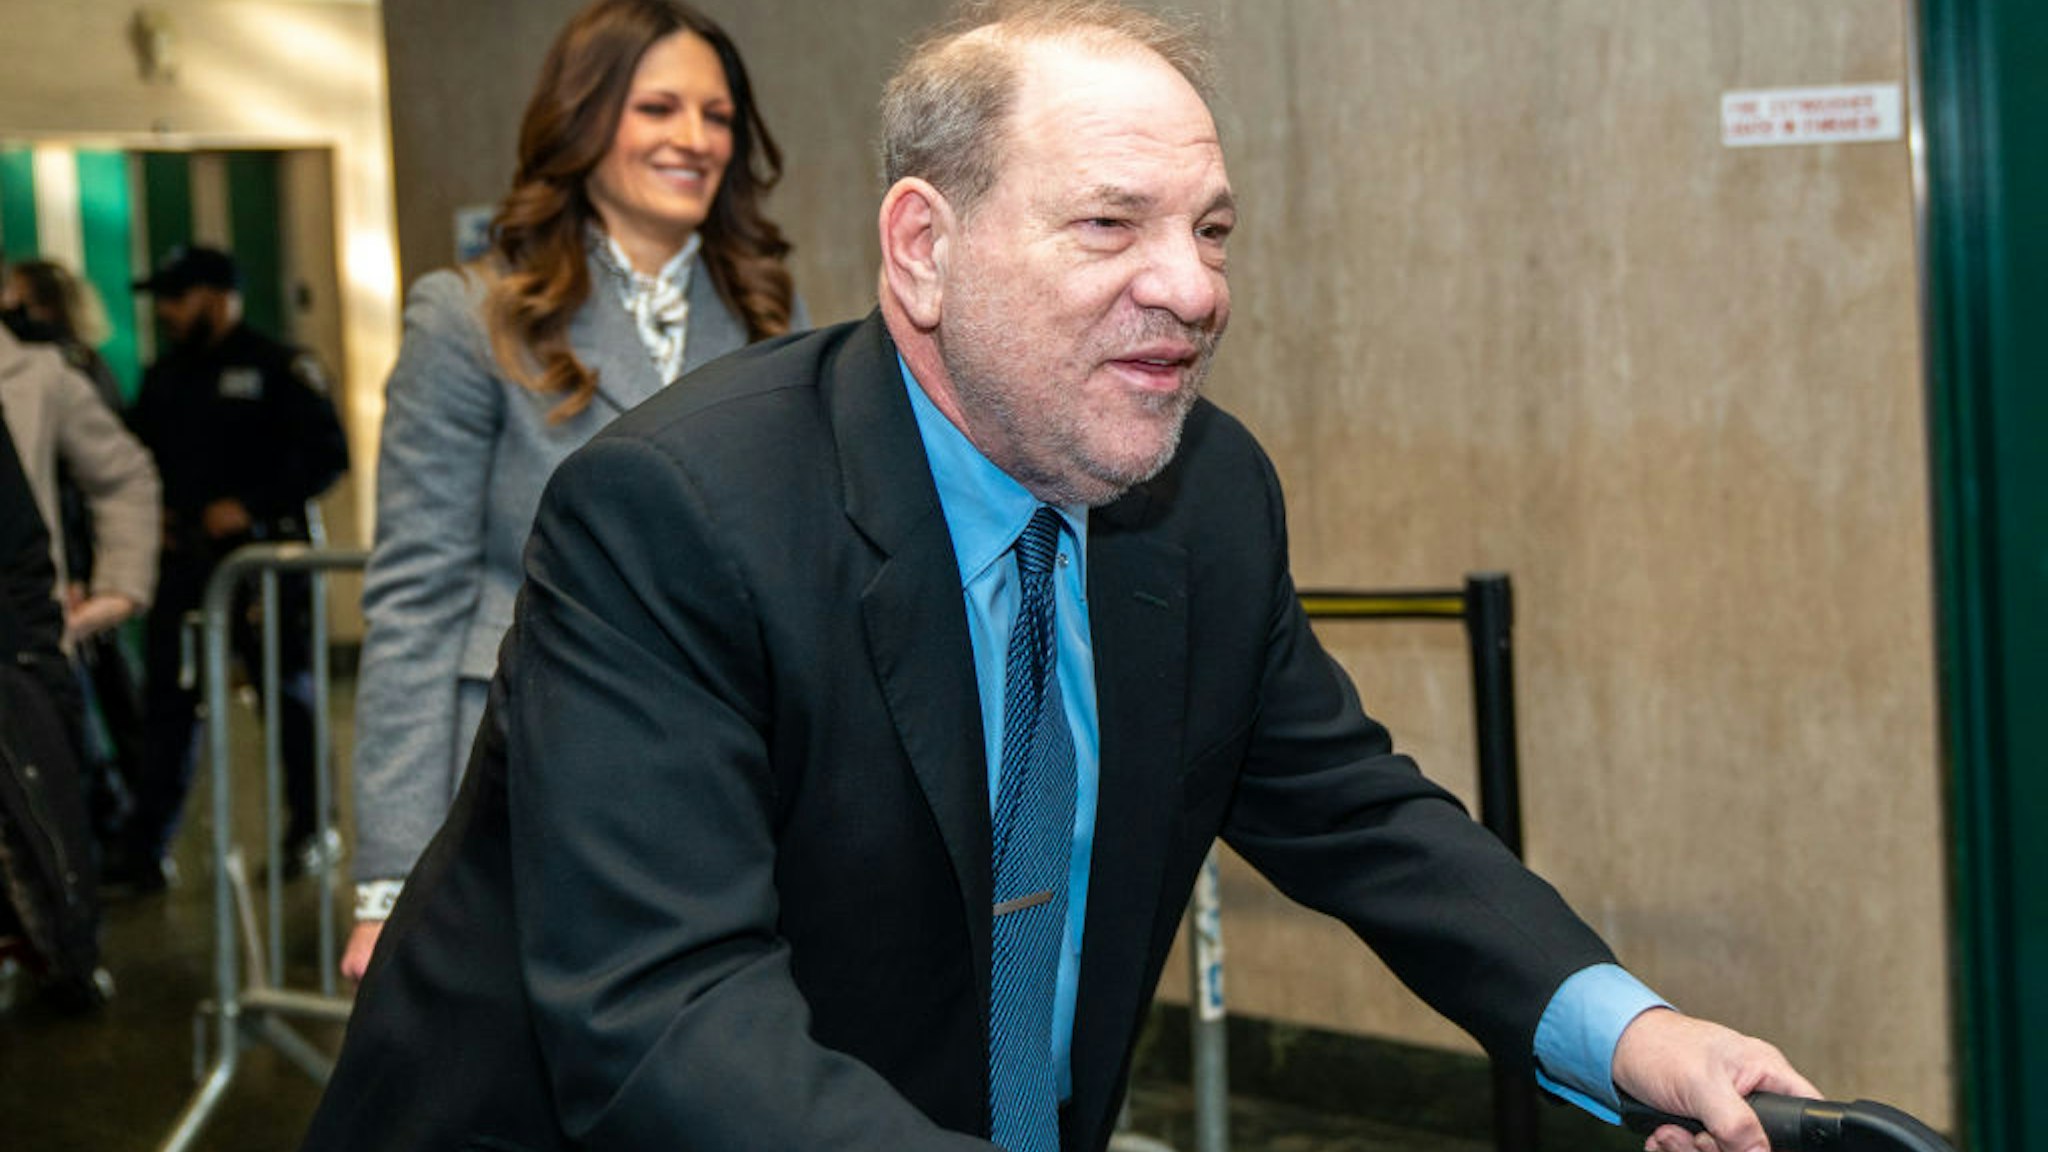 Harvey Weinstein arrives at Manhattan Criminal Court for his sexual assault trial on January 29, 2020 in New York City. Weinstein, whose alleged sexual misconduct helped spark the #MeToo movement, pleaded not-guilty on five counts of rape and sexual assault against two unnamed women and faces a possible life sentence in prison.